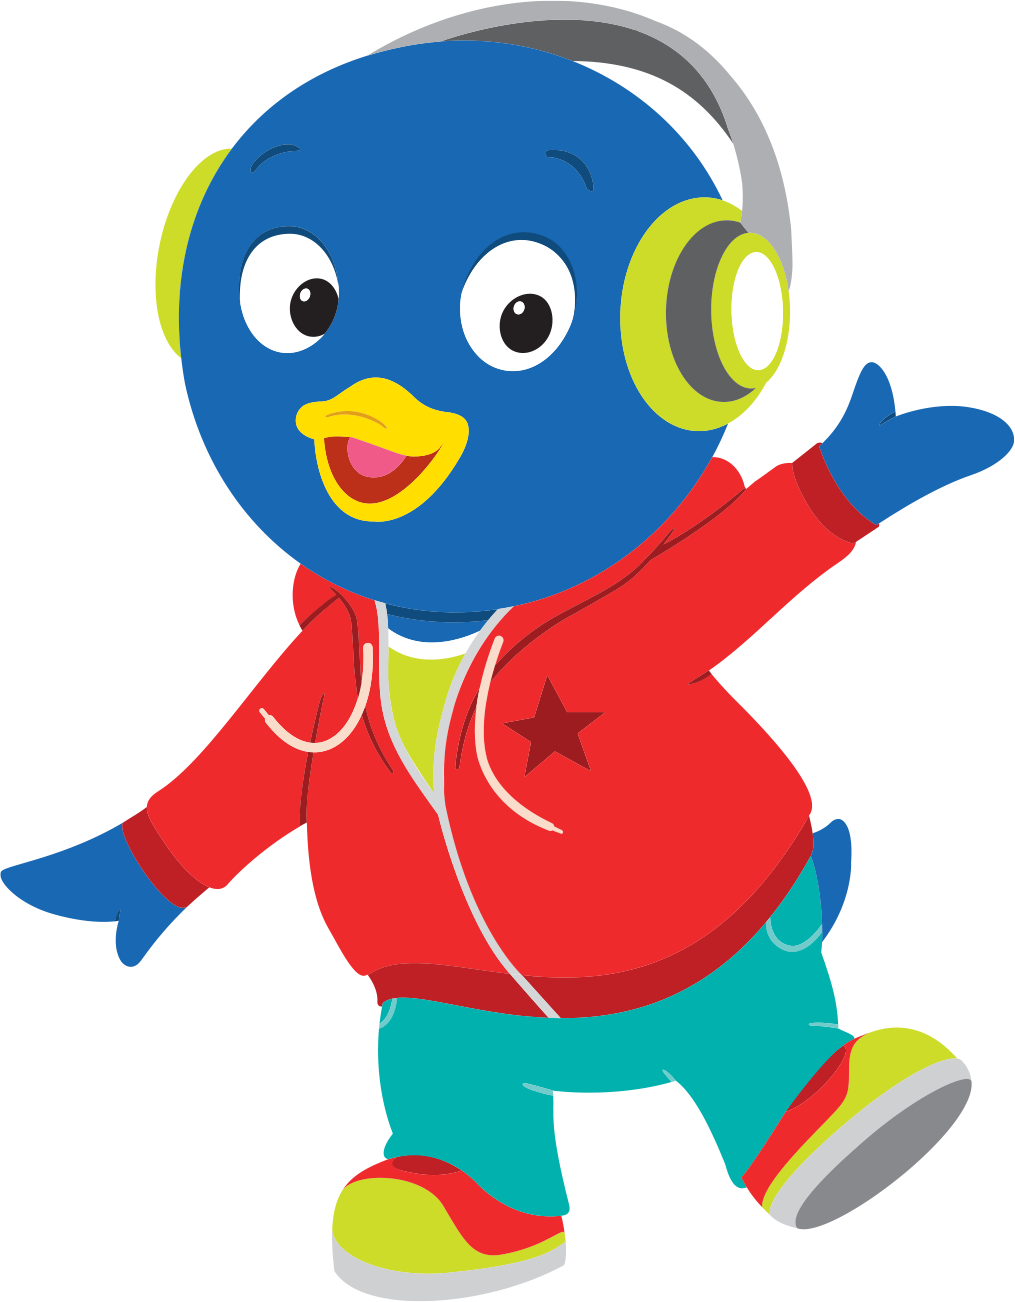 The Backyardigans Move To The Music Pablo 1 - Pablo From The Backyardigans (1015x1302)